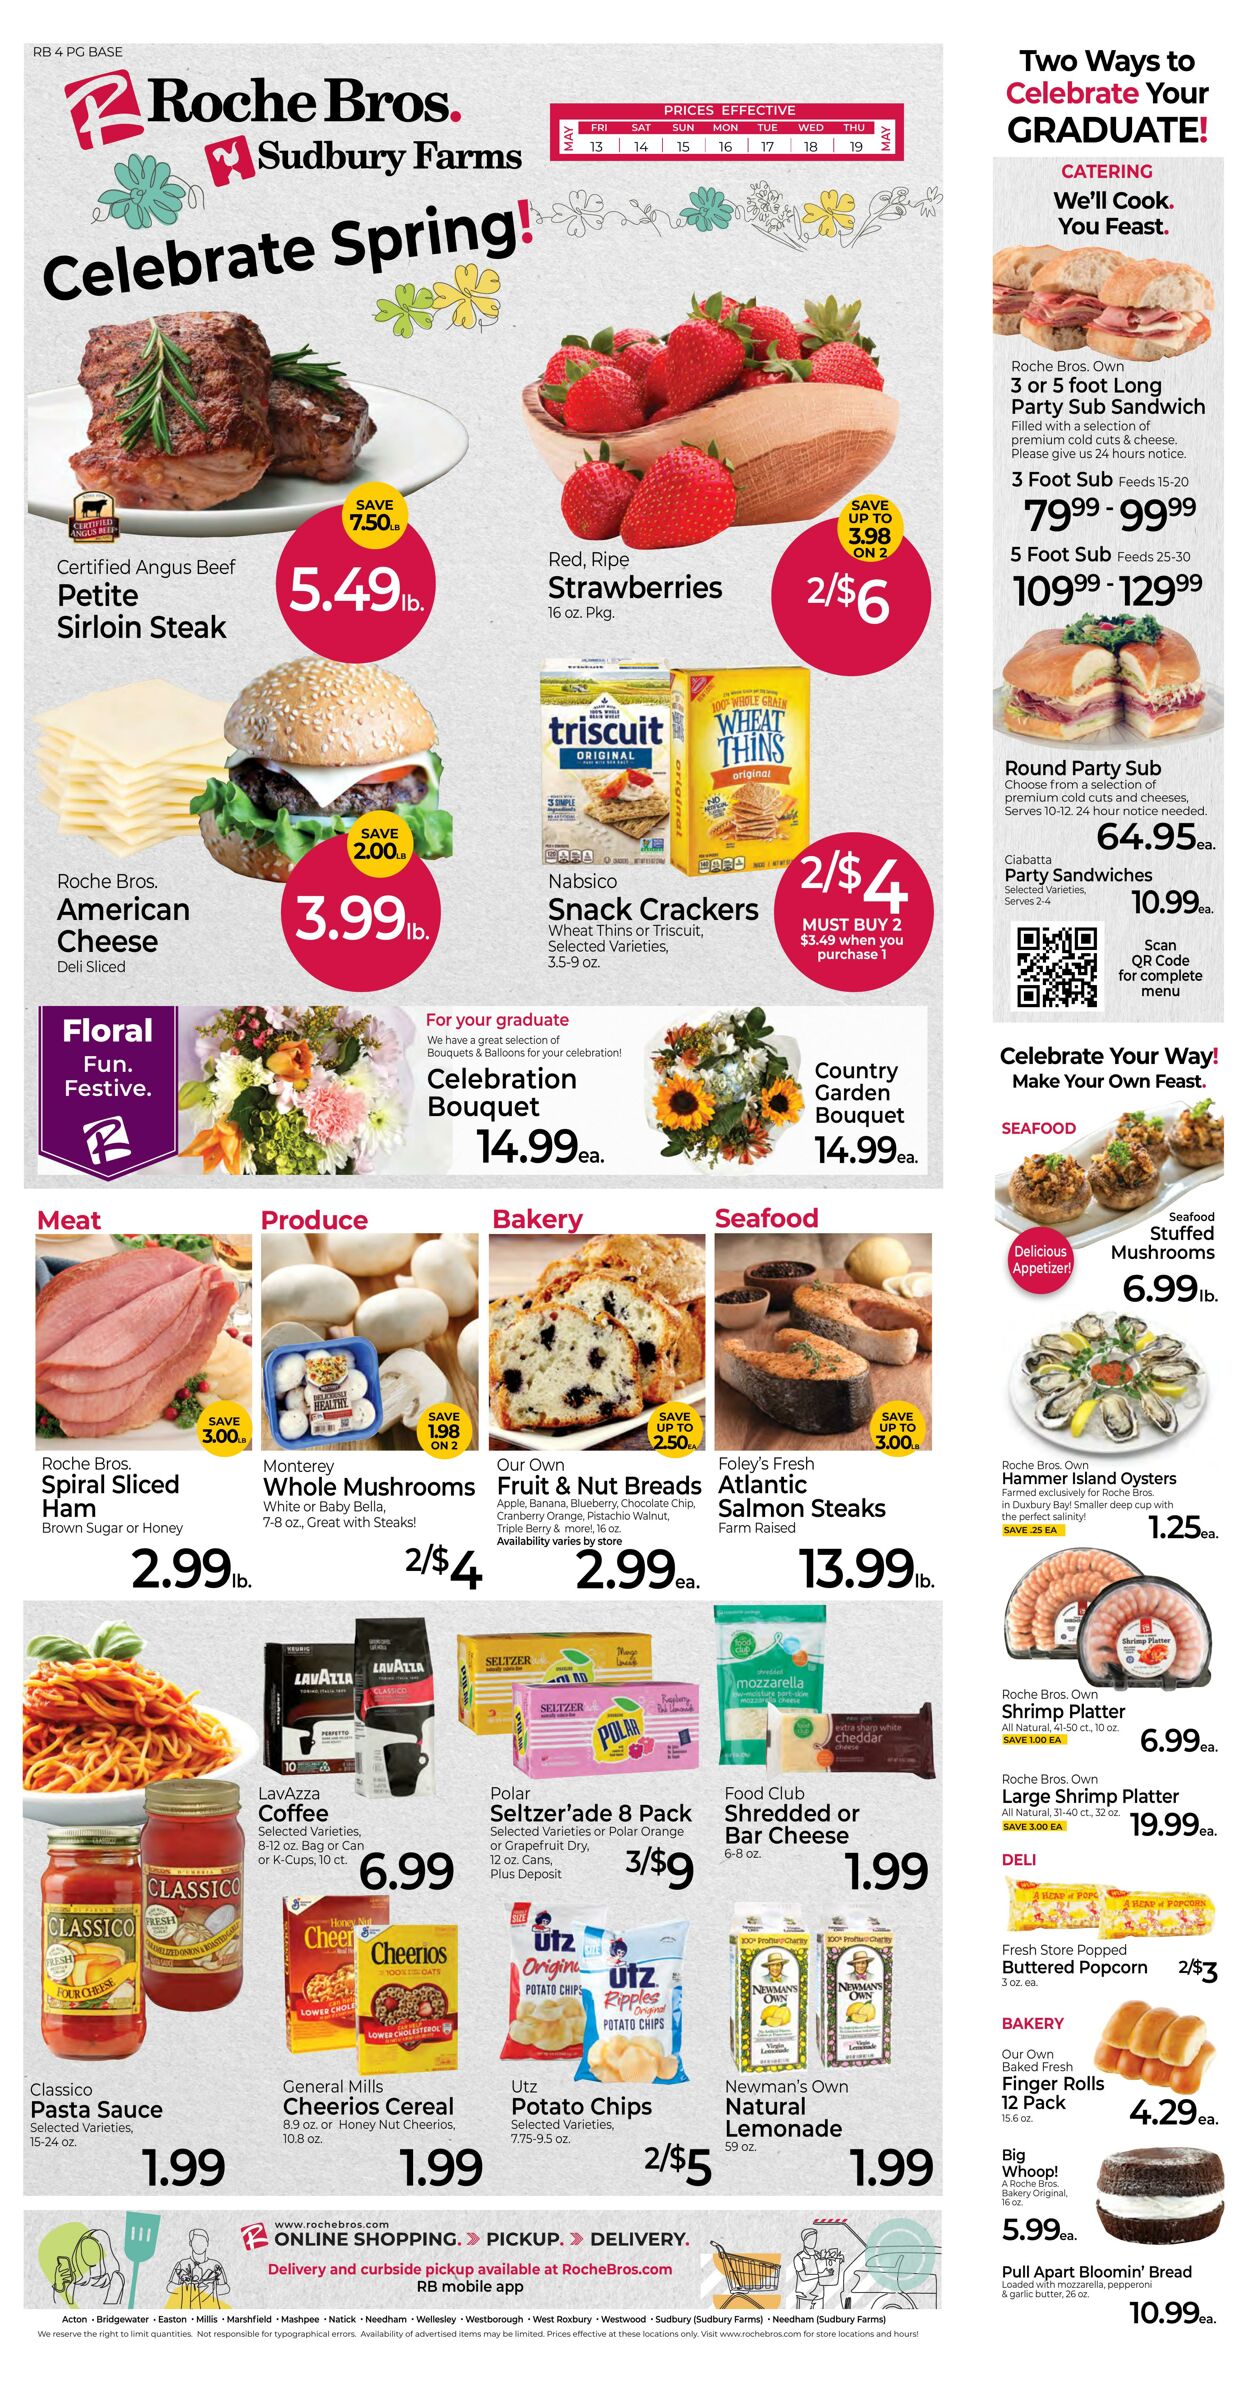 Roche Bros Promotional weekly ads